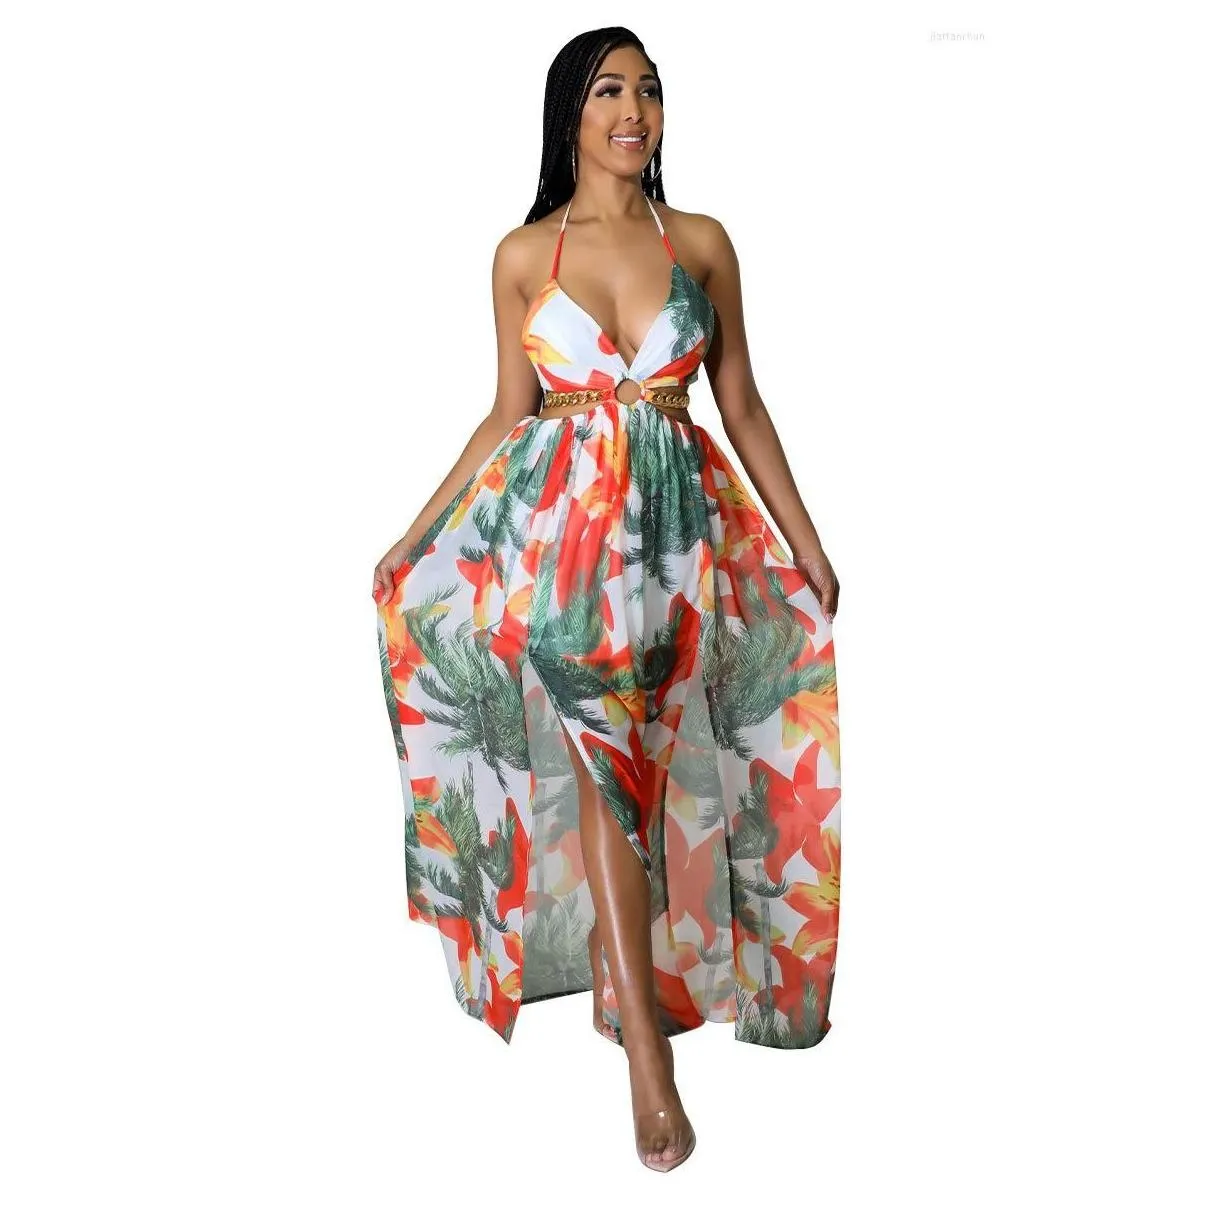 Basic & Casual Dresses Casual Dresses Floral Print Boho Maxi For Women 2022 Summer Halter Backless High Split Holiday Dress Y Cut Out Dhgwl